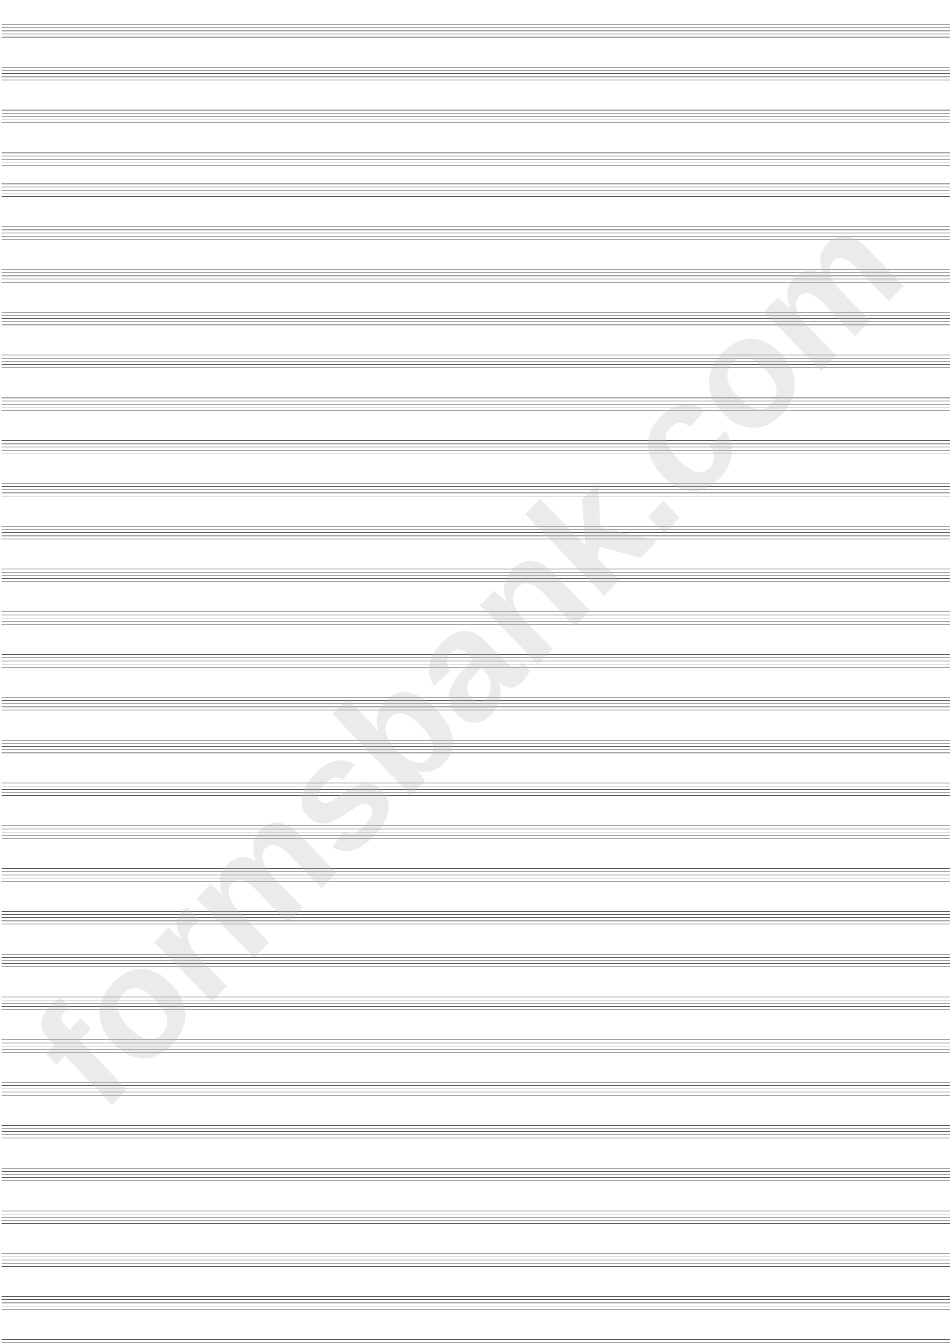 24-Stave With No Clef To One Page (Tabloid - 11" X 17" Landscape) Blank Sheet Music